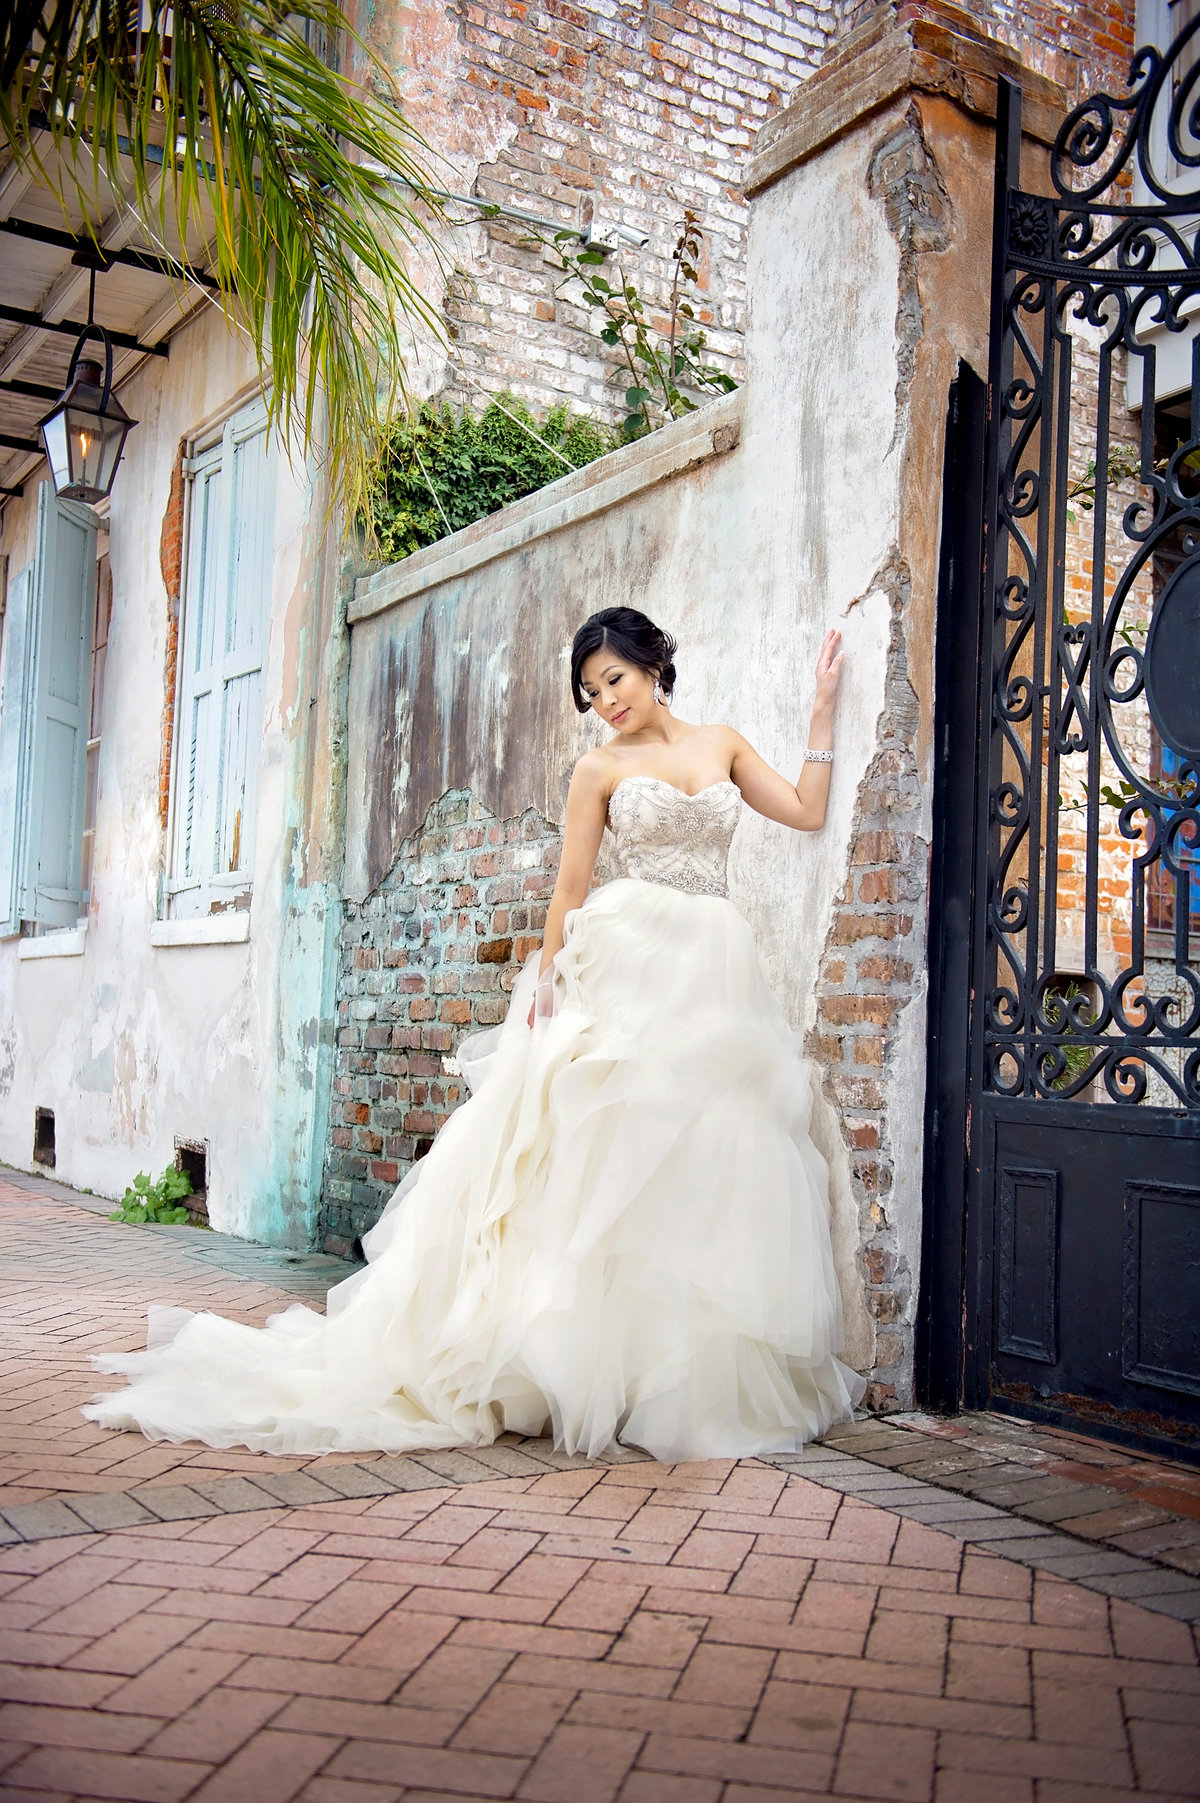 New Orleans Wedding Photographyrace_and_religious_nola10120